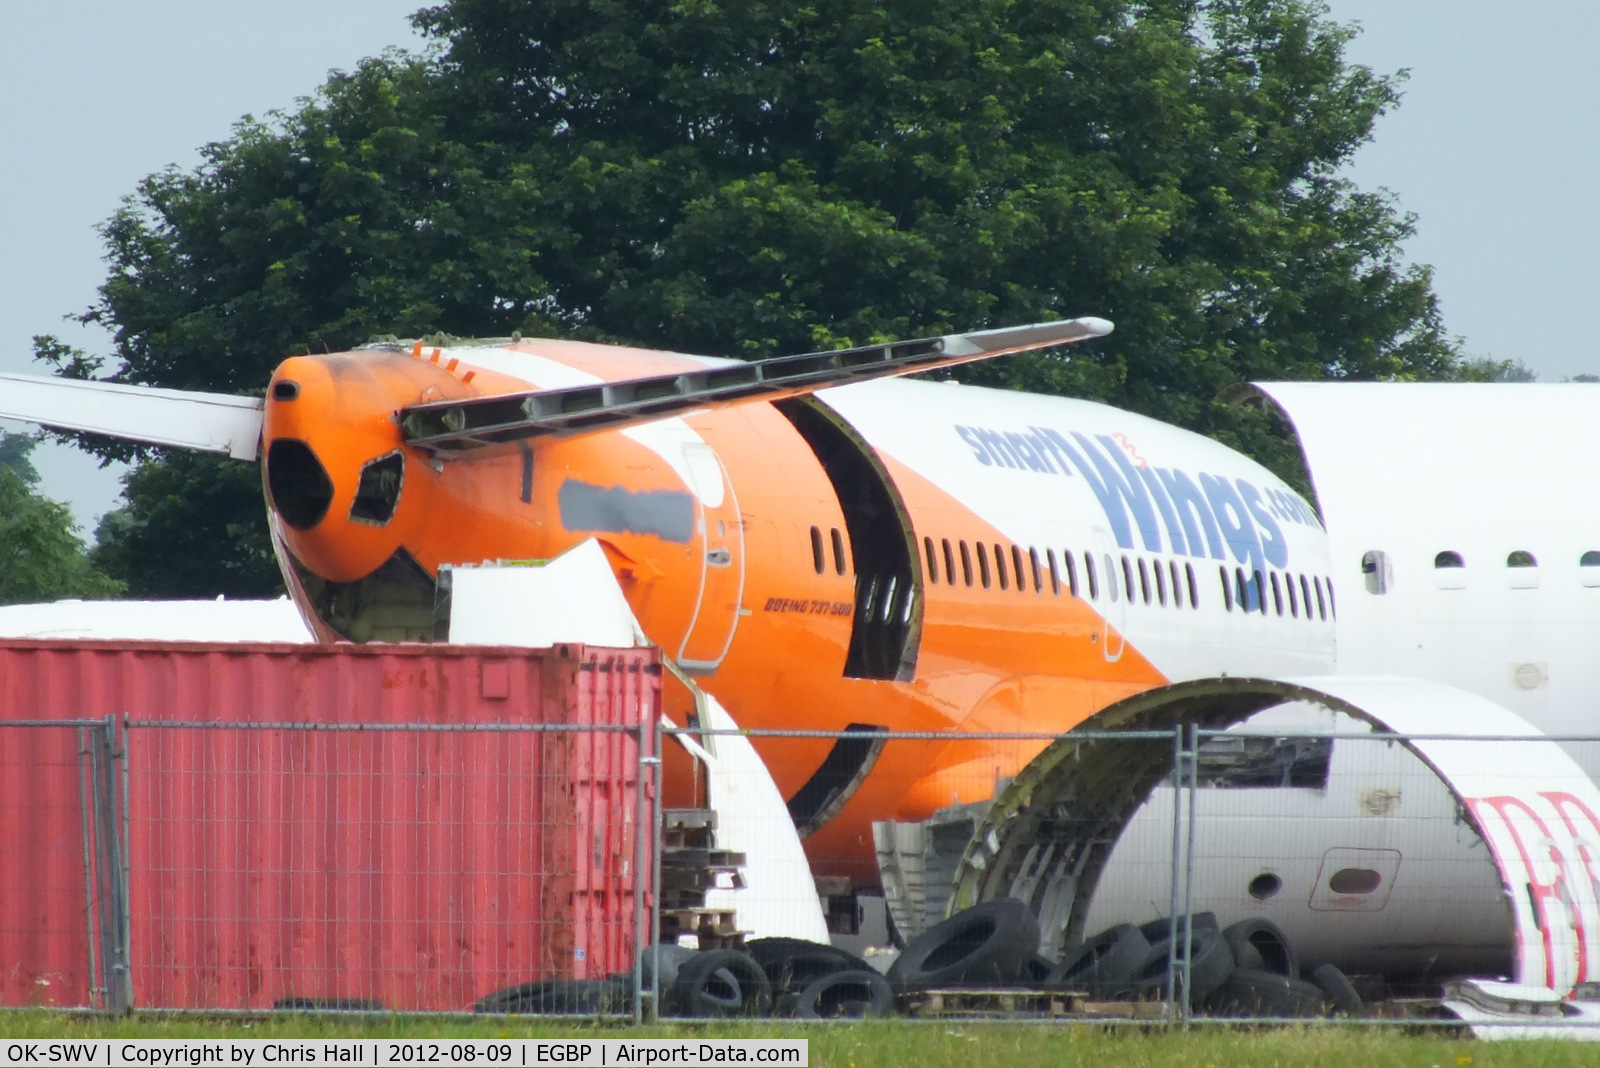 OK-SWV, 1993 Boeing 737-522 C/N 26696, ex SmartWings B737 in the scrapping area at Kemble